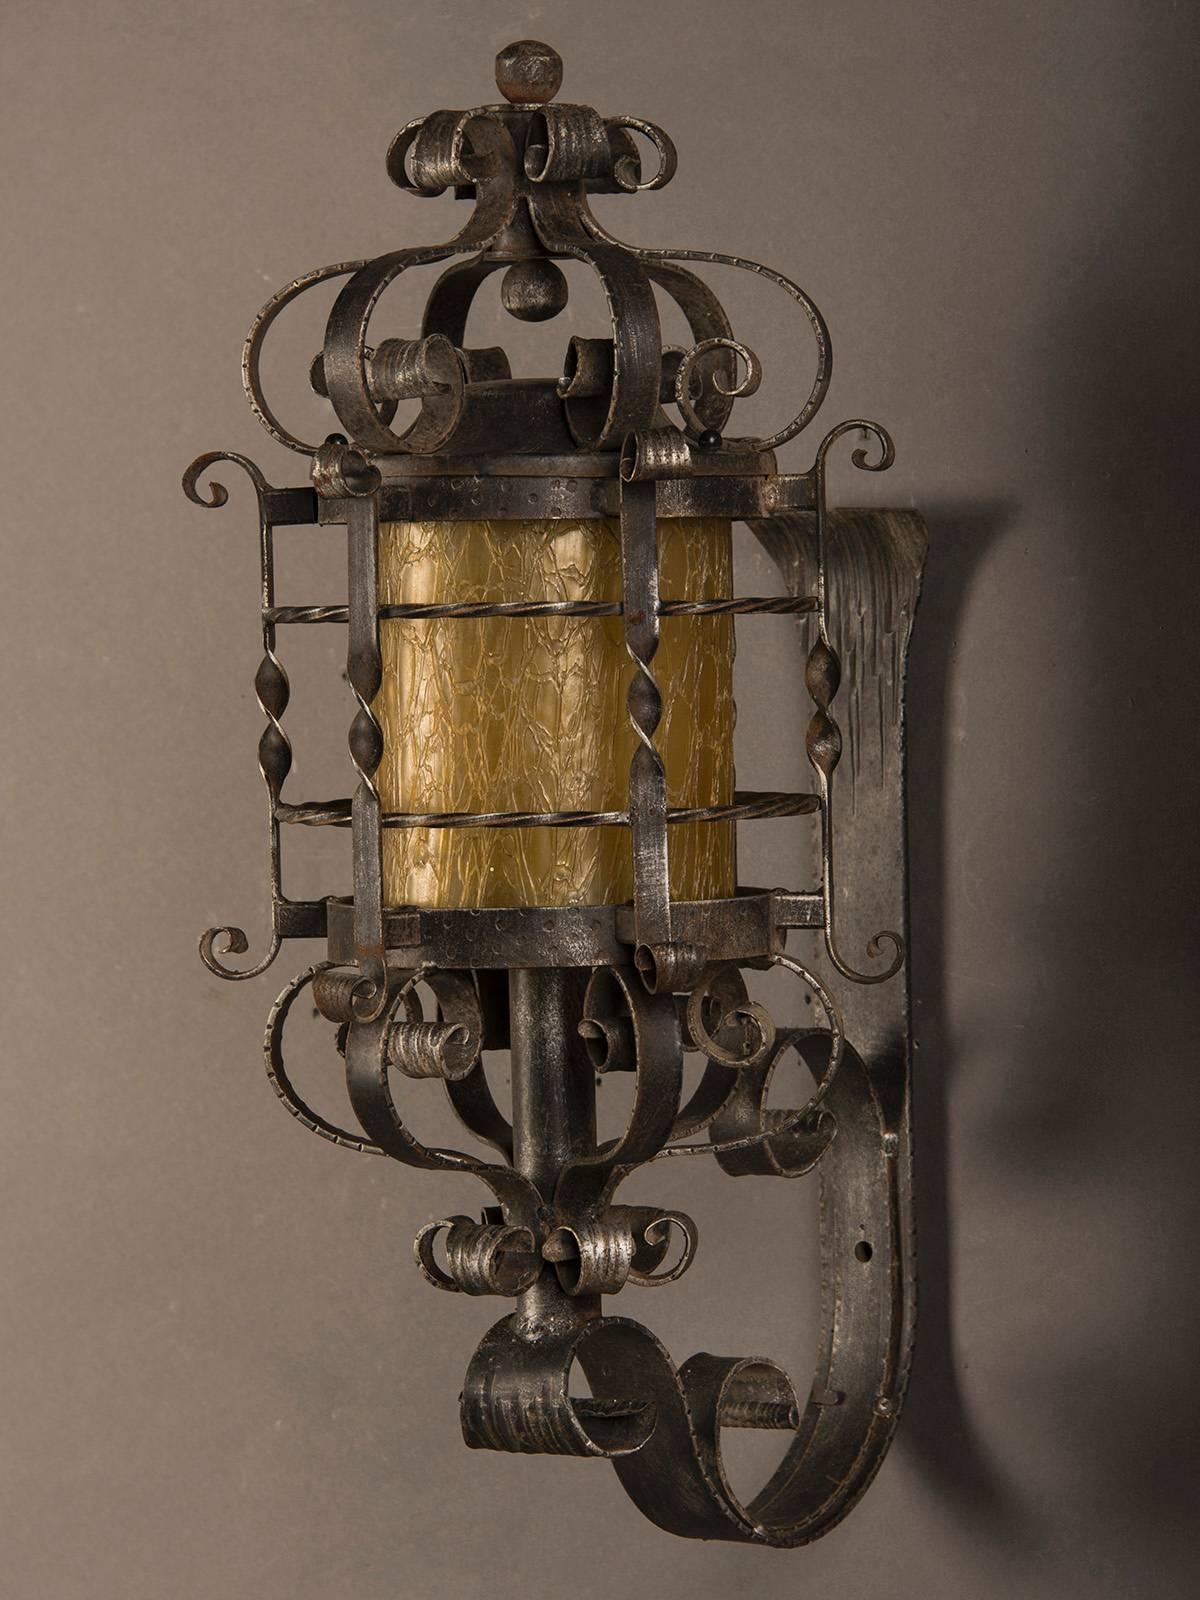 Receive our new selections direct from 1stdibs by email each week. Please click “Follow Dealer” button below and see them first!

Vintage French forged iron wall lantern, glass shade, circa 1940.